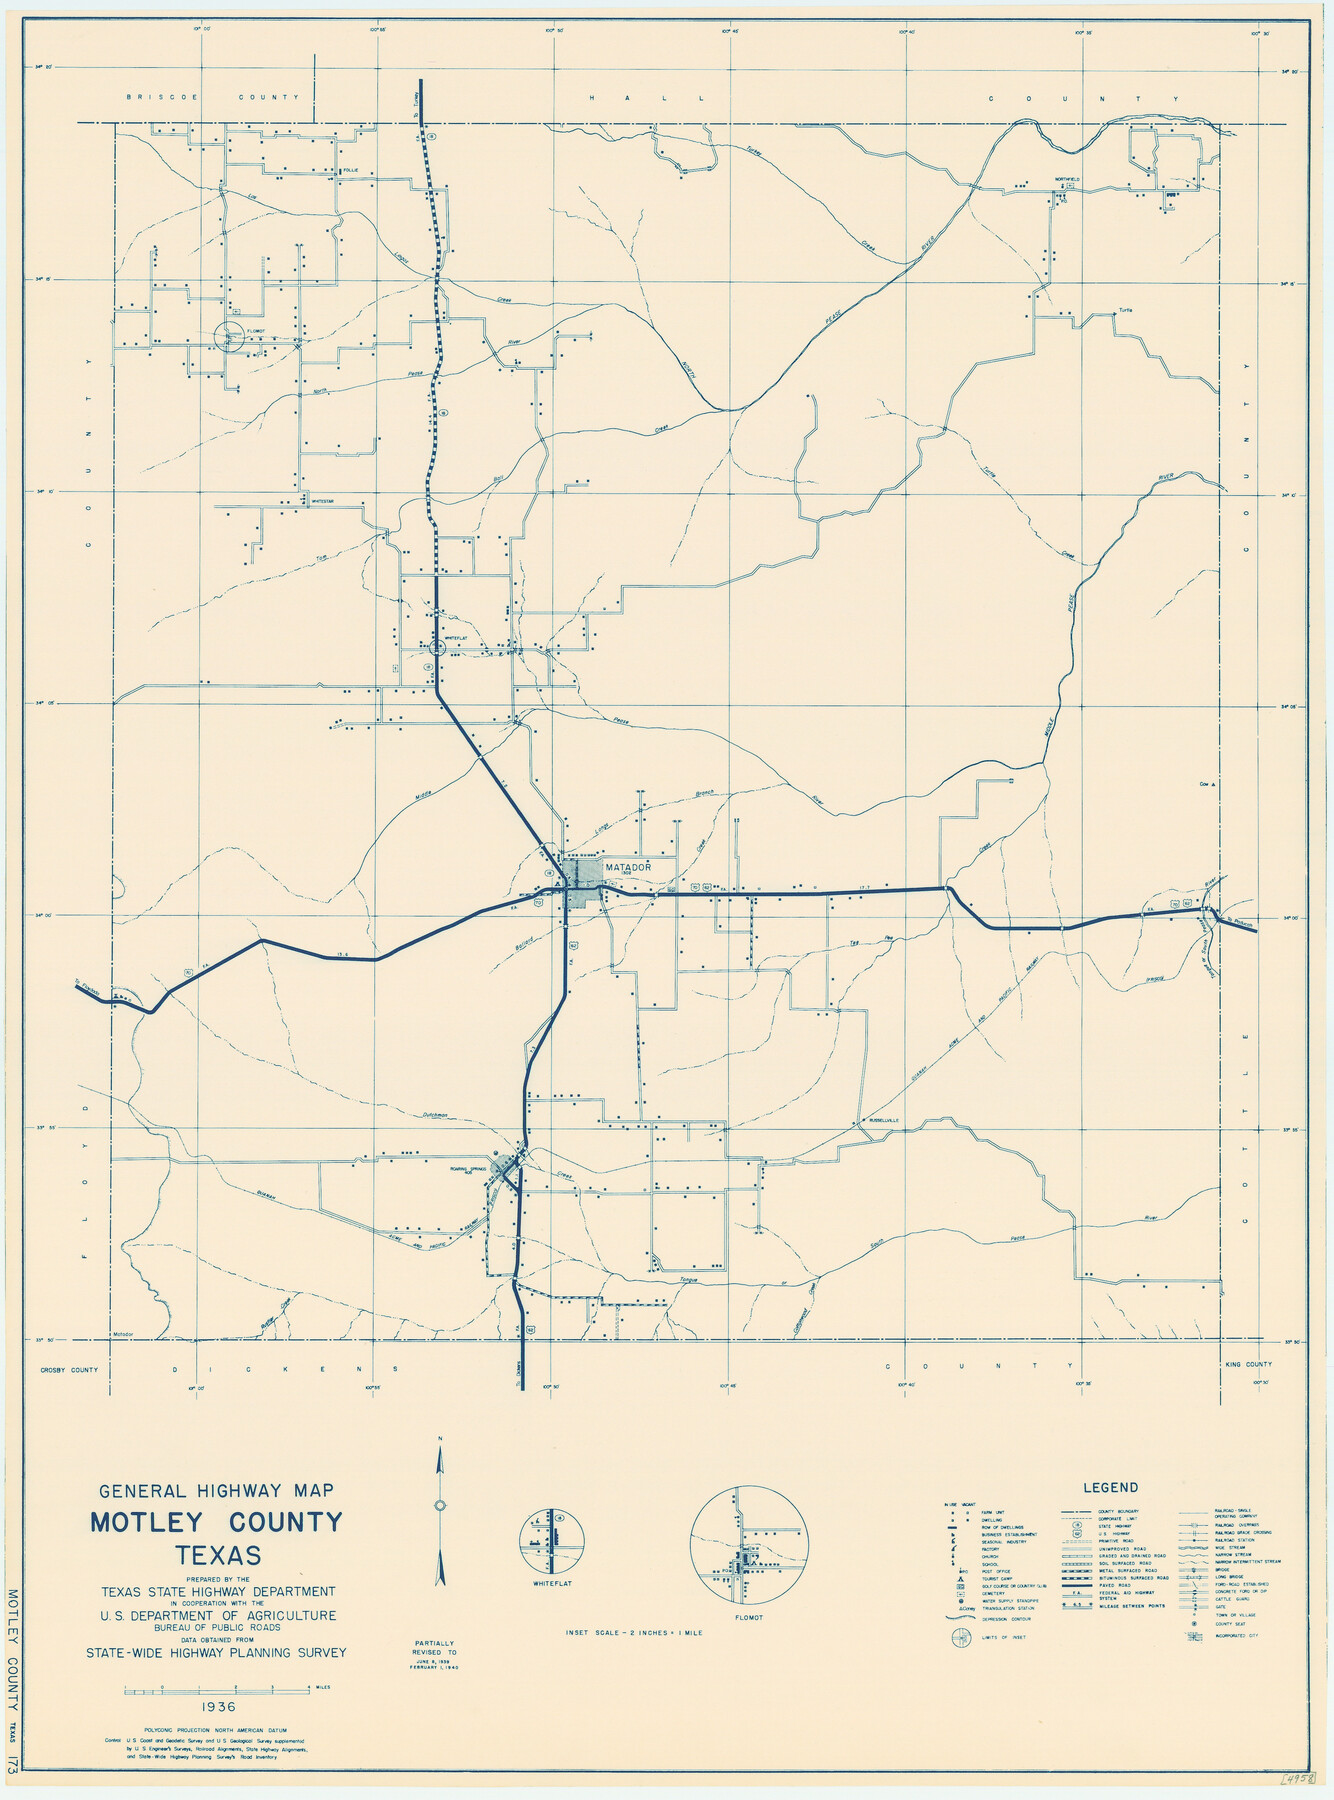 79204, General Highway Map, Motley County, Texas, Texas State Library and Archives